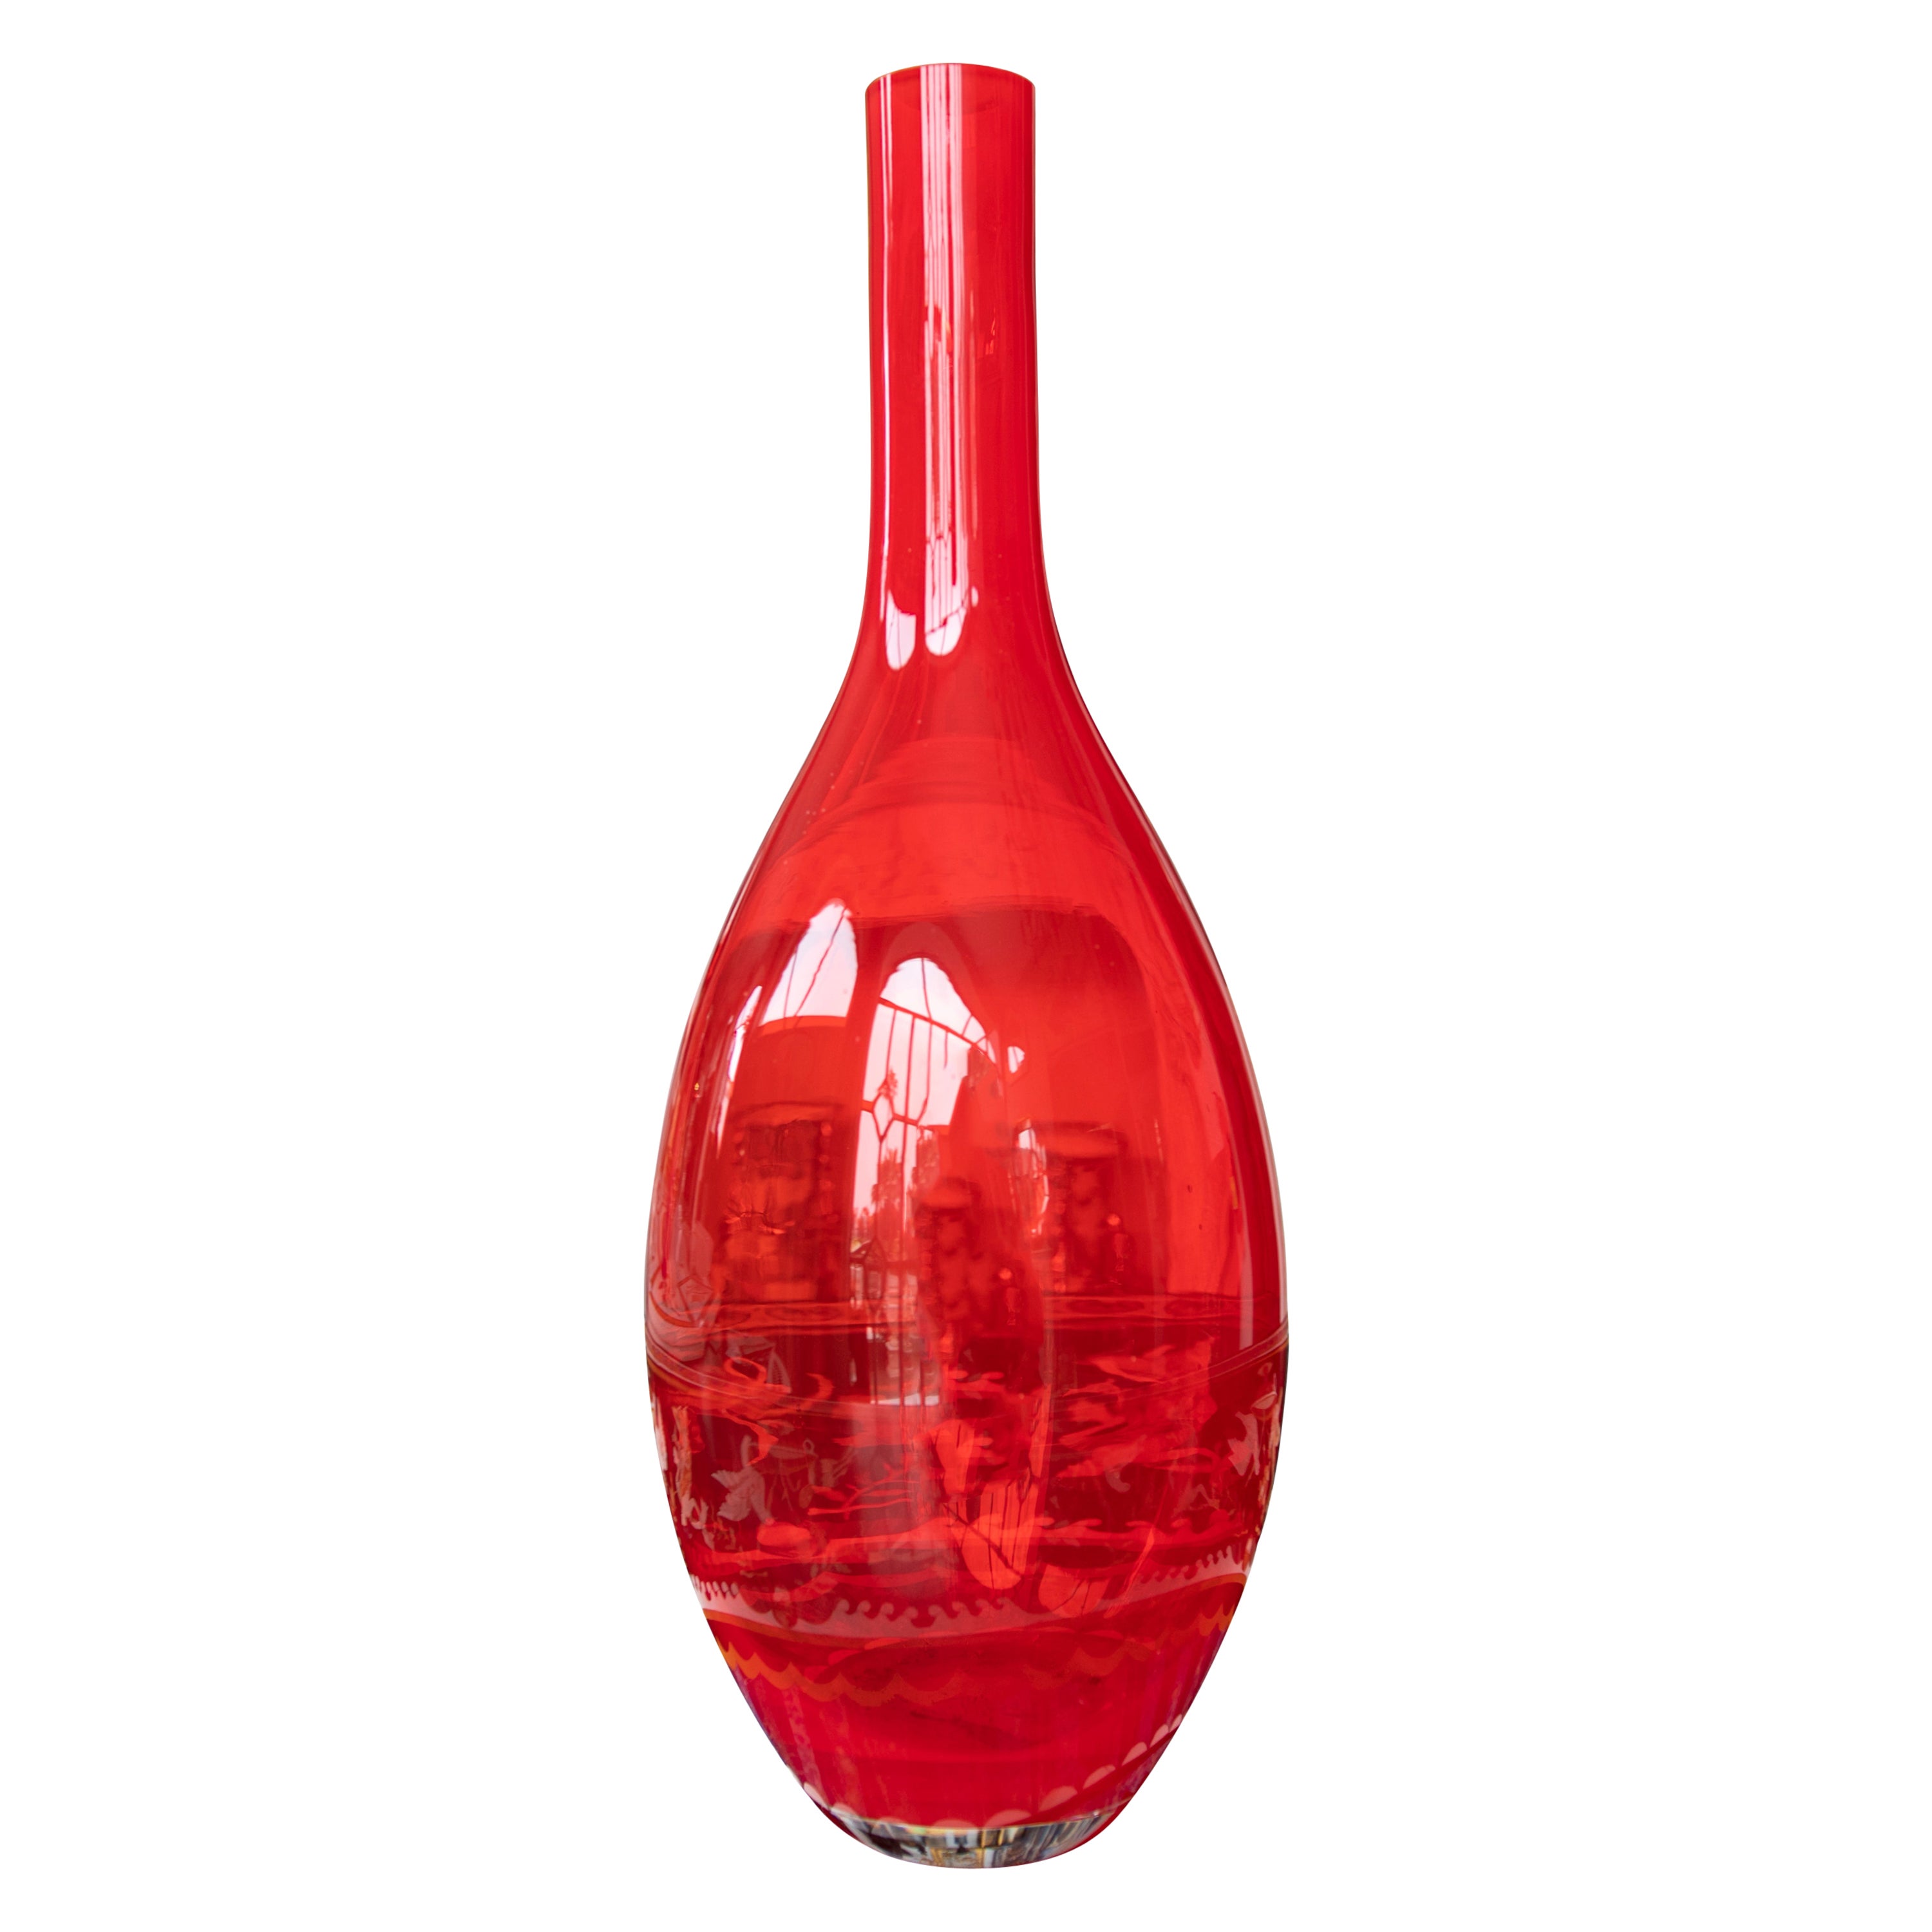 1980s Red Murano Vase with Tall Neck